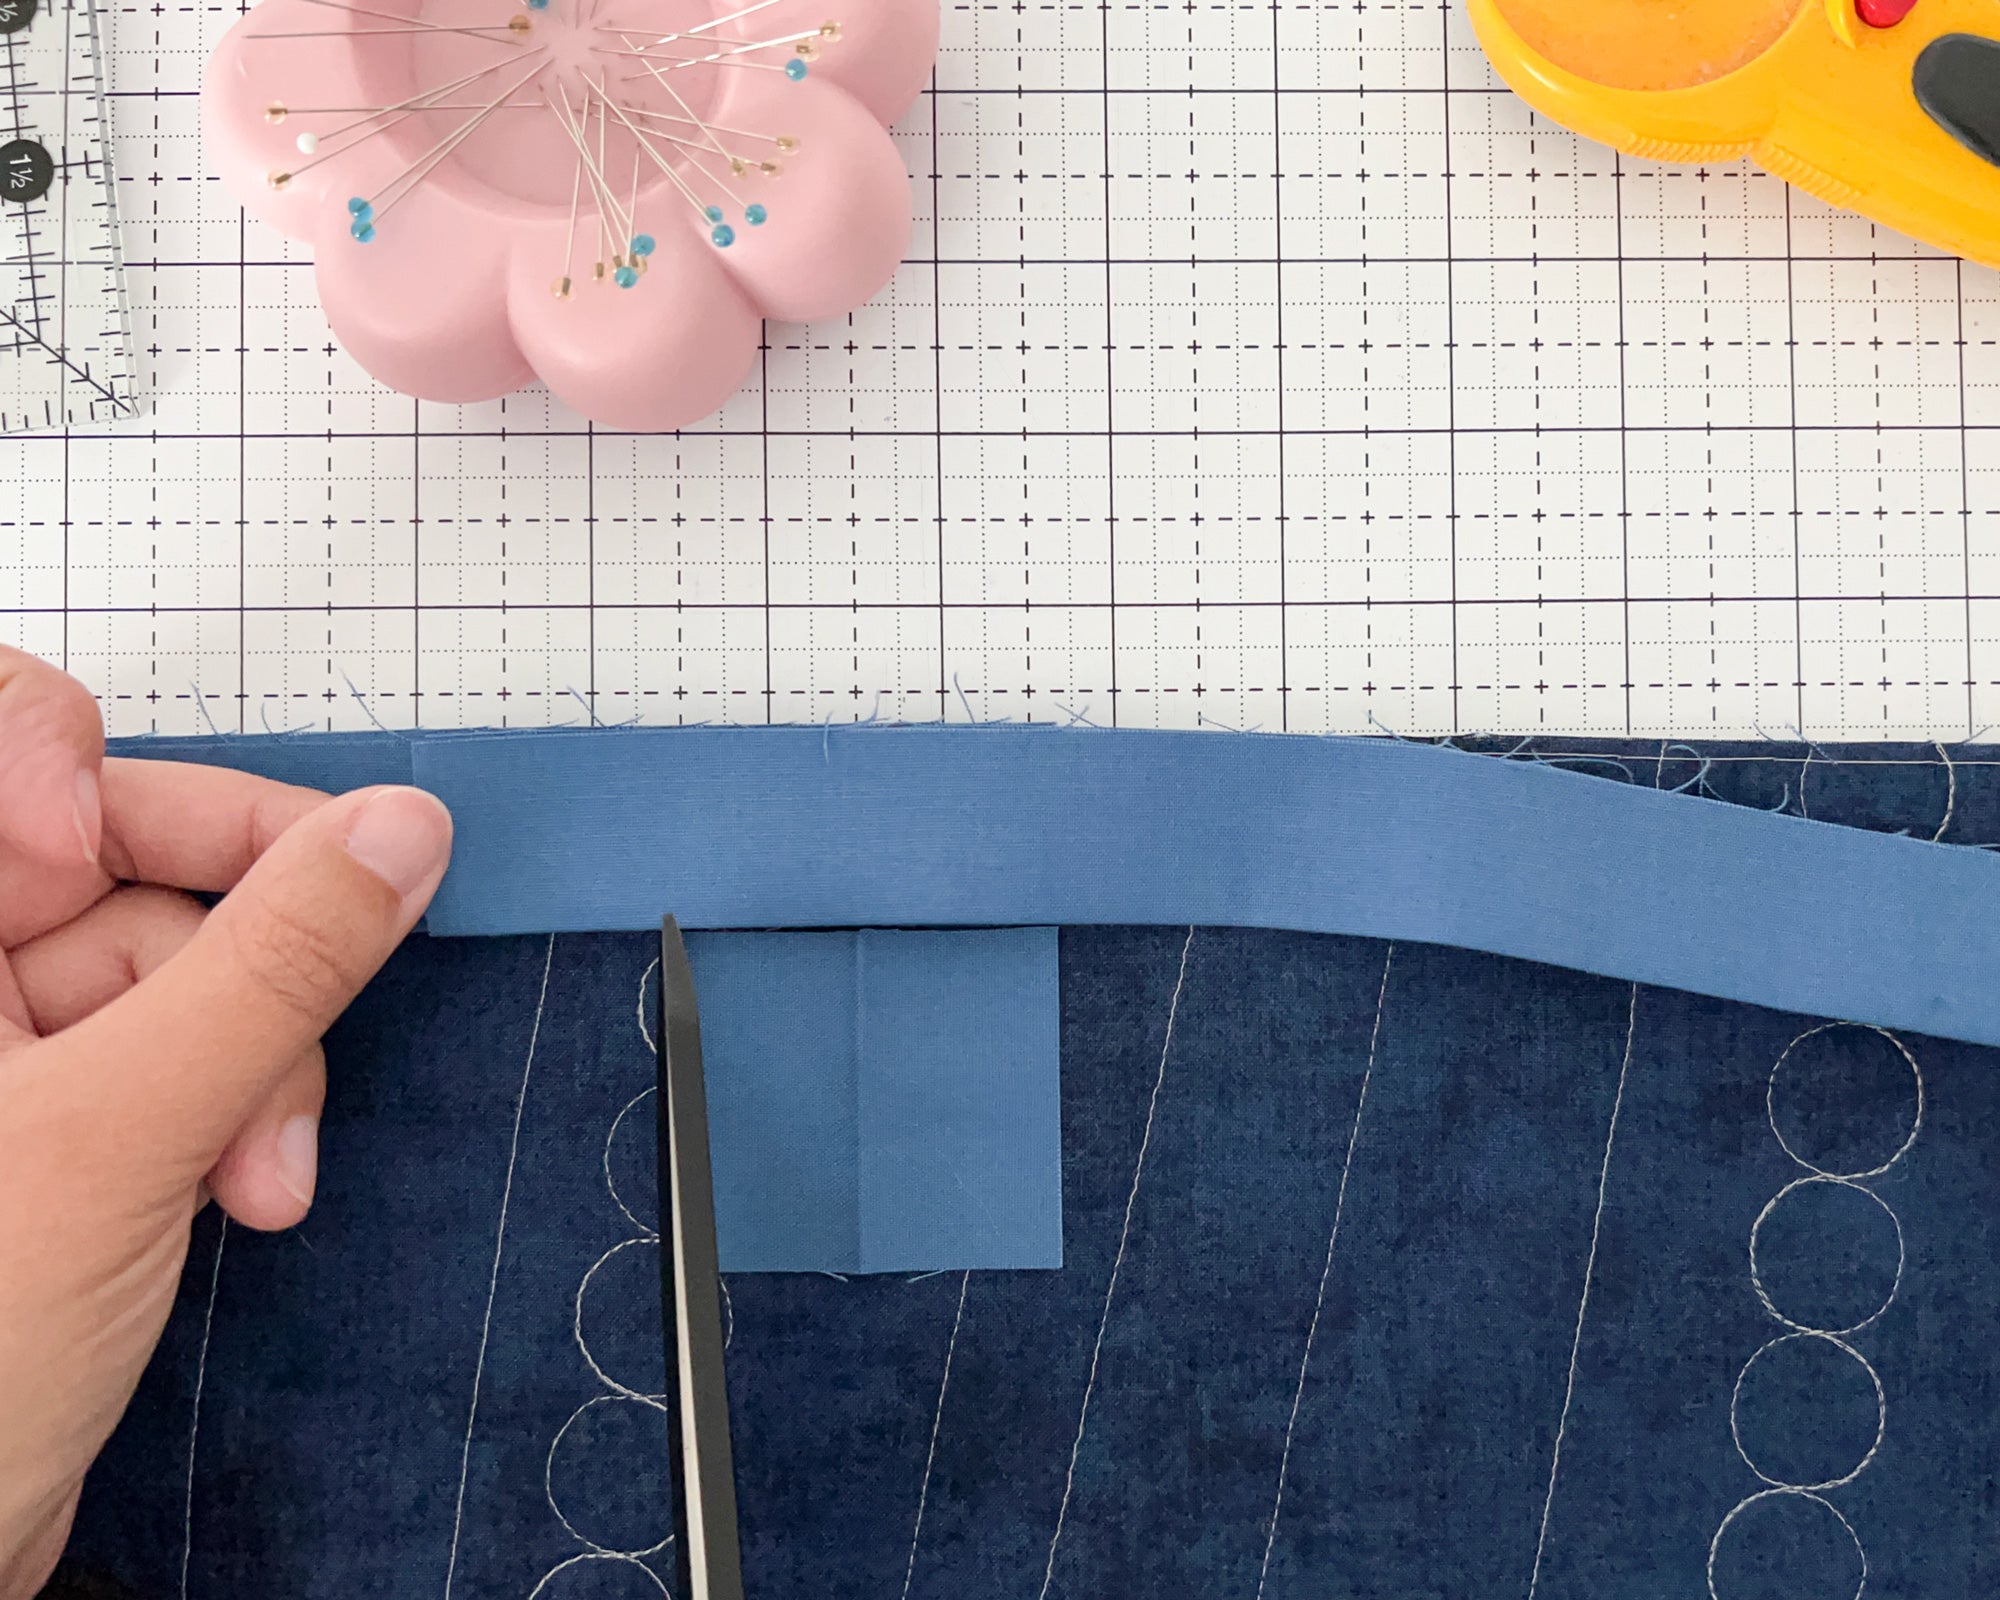 Learn how to sew your binding onto your quilt with this beginner-friendly binding tutorial from Cotton and Joy.